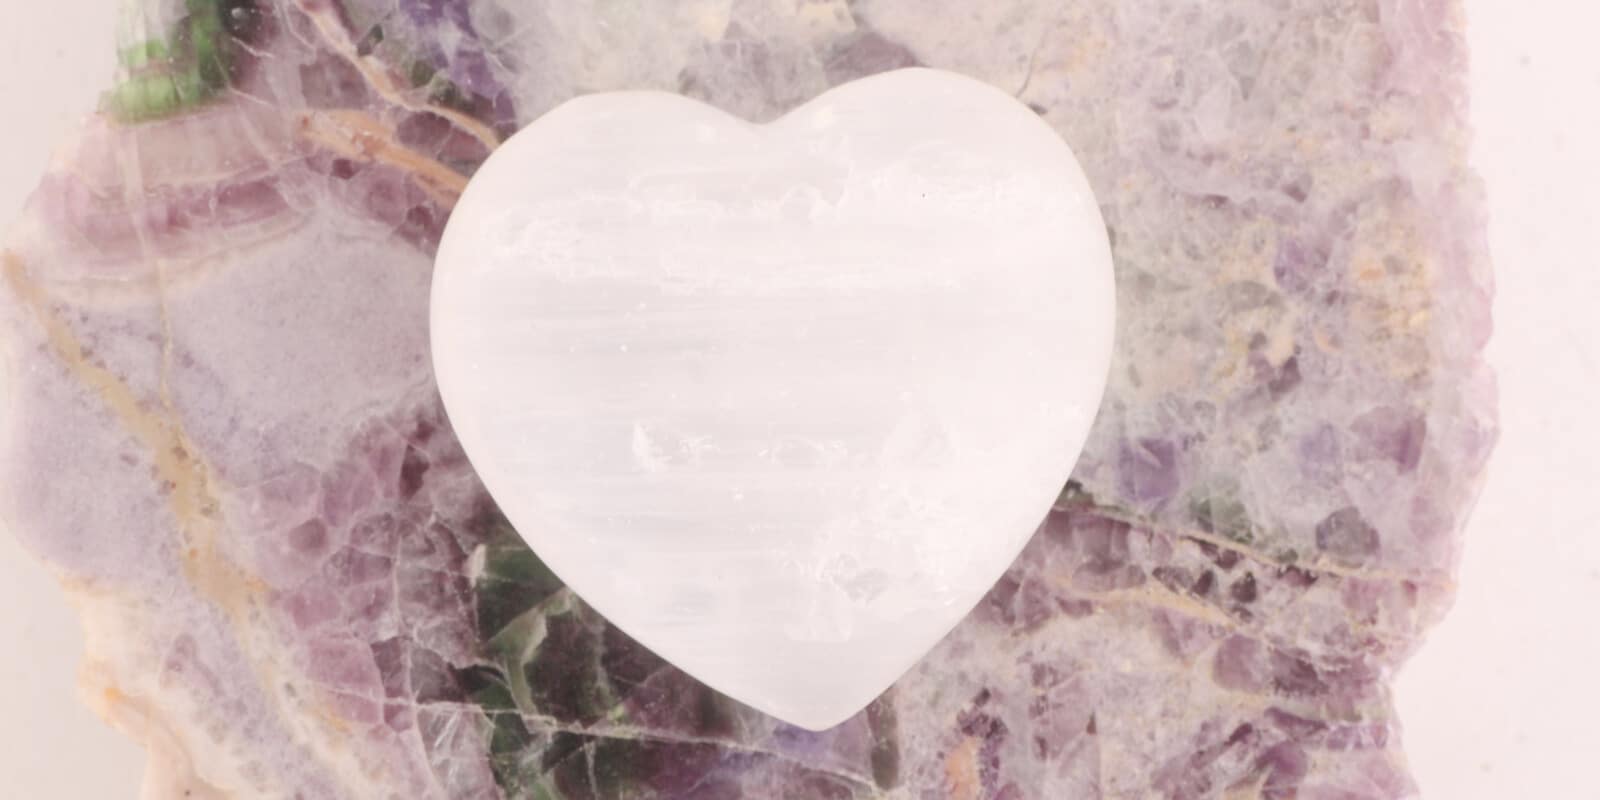 A translucent heart-shaped stone rests upon a mottled purple and green mineral background, exuding a sense of serene beauty and spiritual harmony.